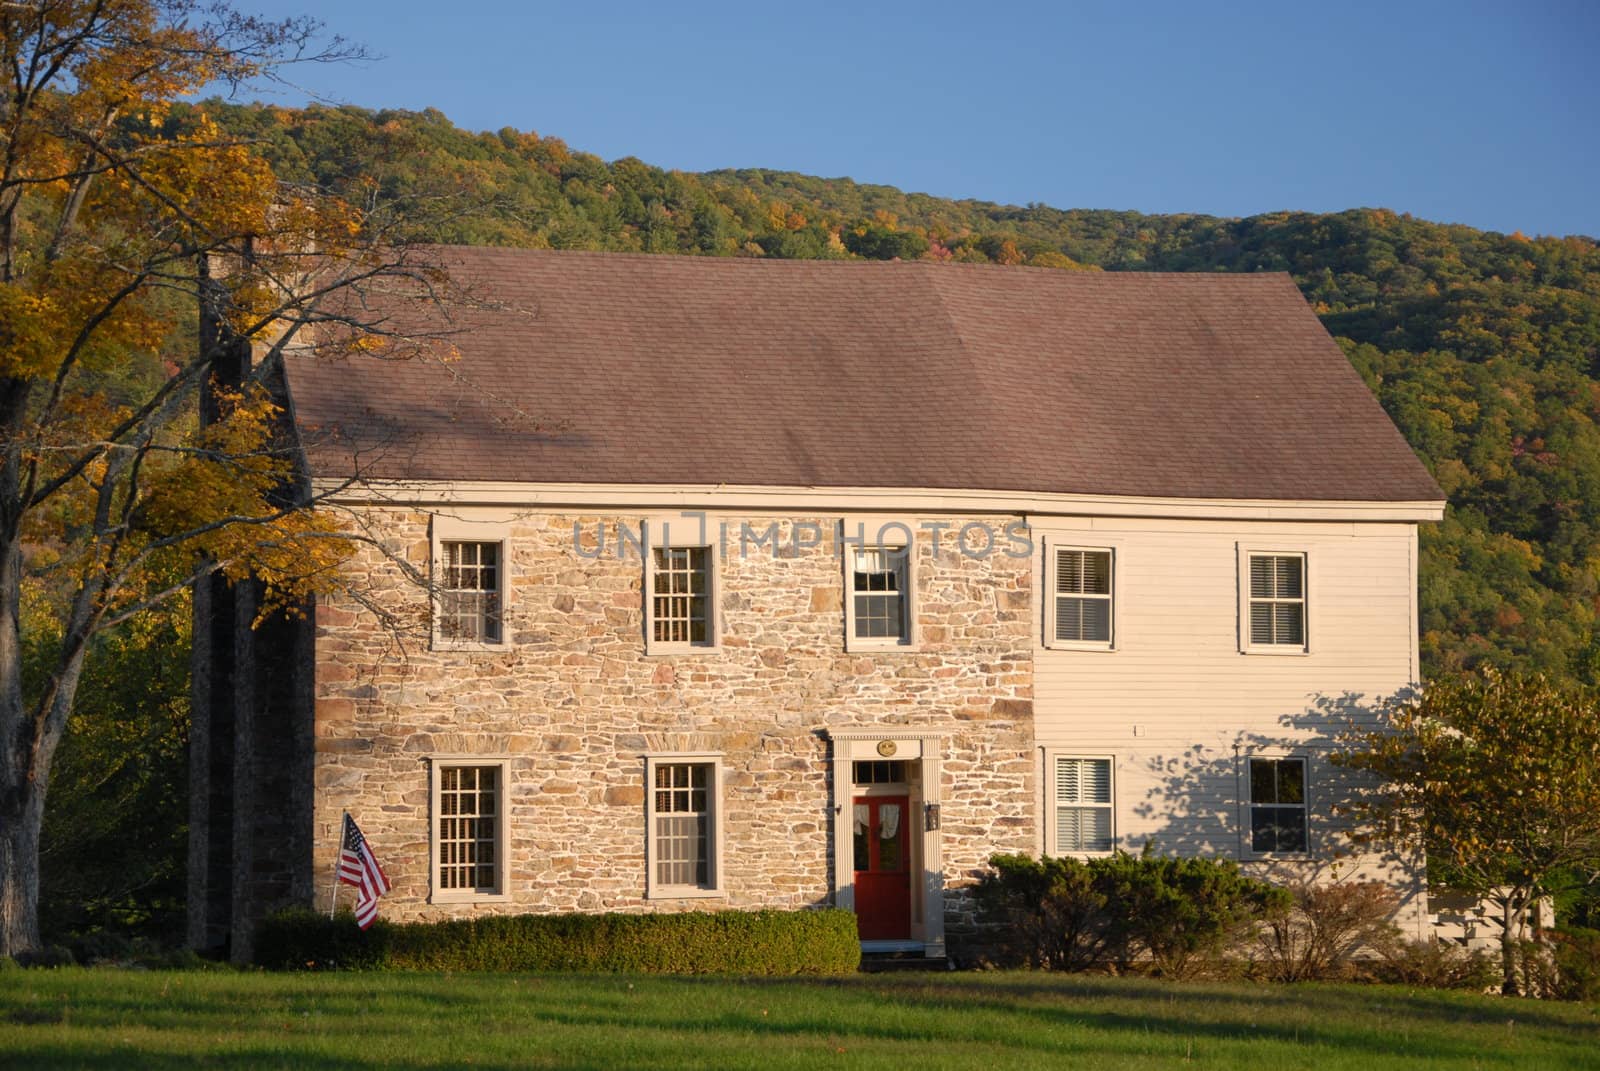 An old stone house in the fall of the year